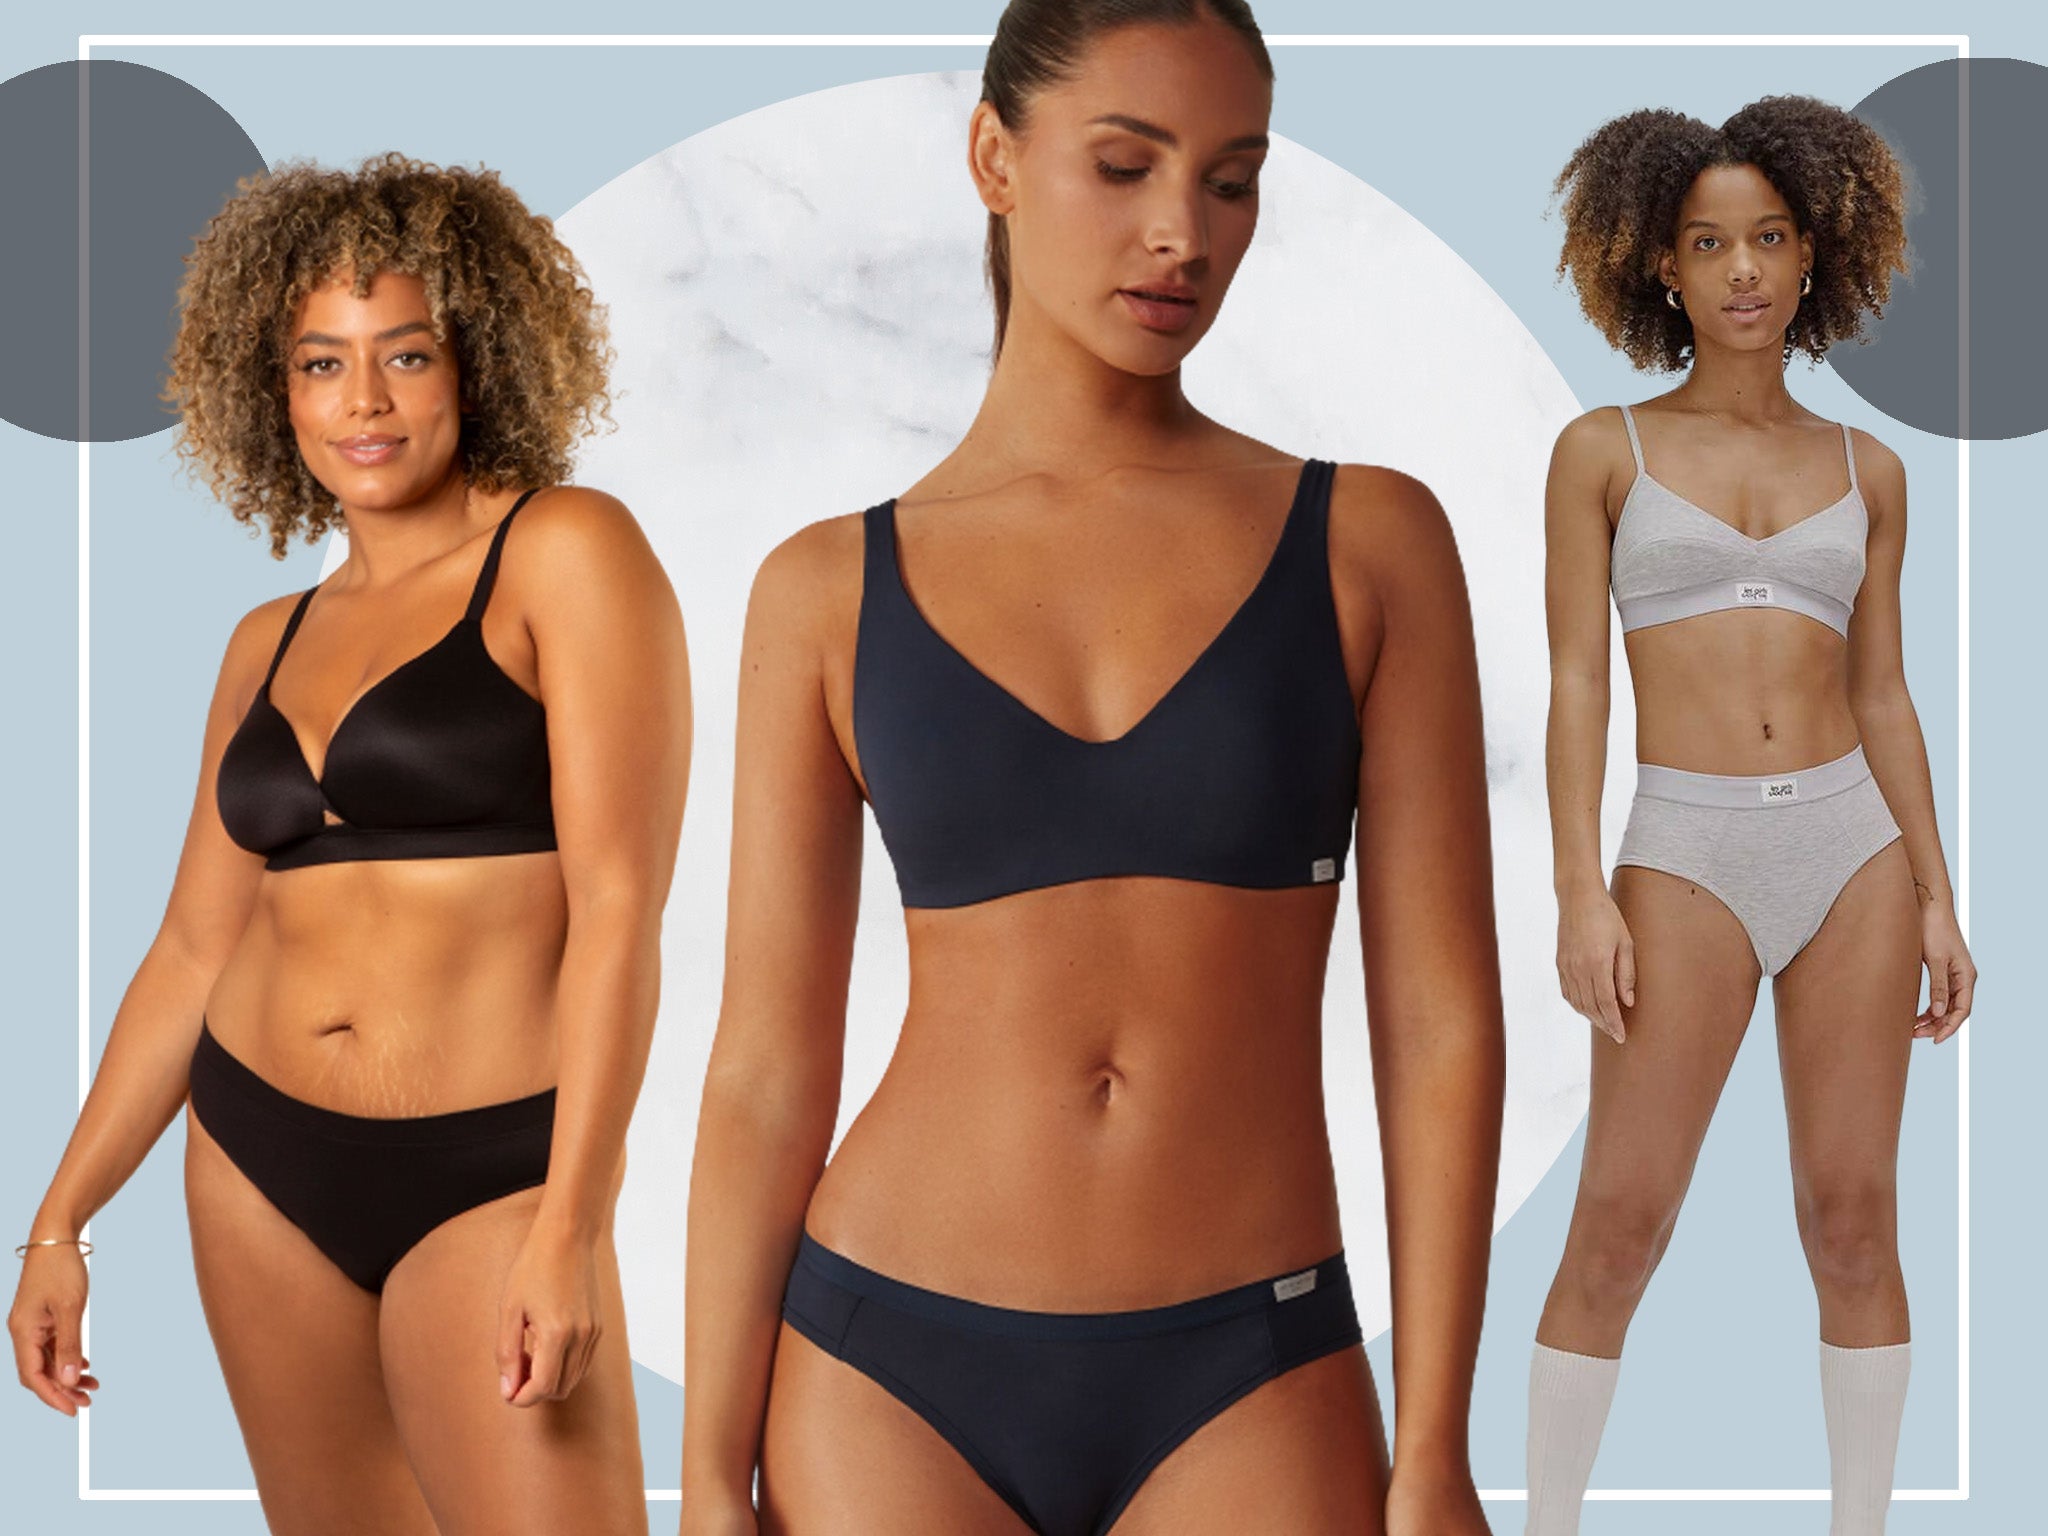 HerRoom: Women's Lingerie, Bras, Panties, Swimwear & More Meta: HerRoom has  all your favorite bra, underwear & lingerie brands in one online shop. Find  your perfect fit with our Universal Cup Size™